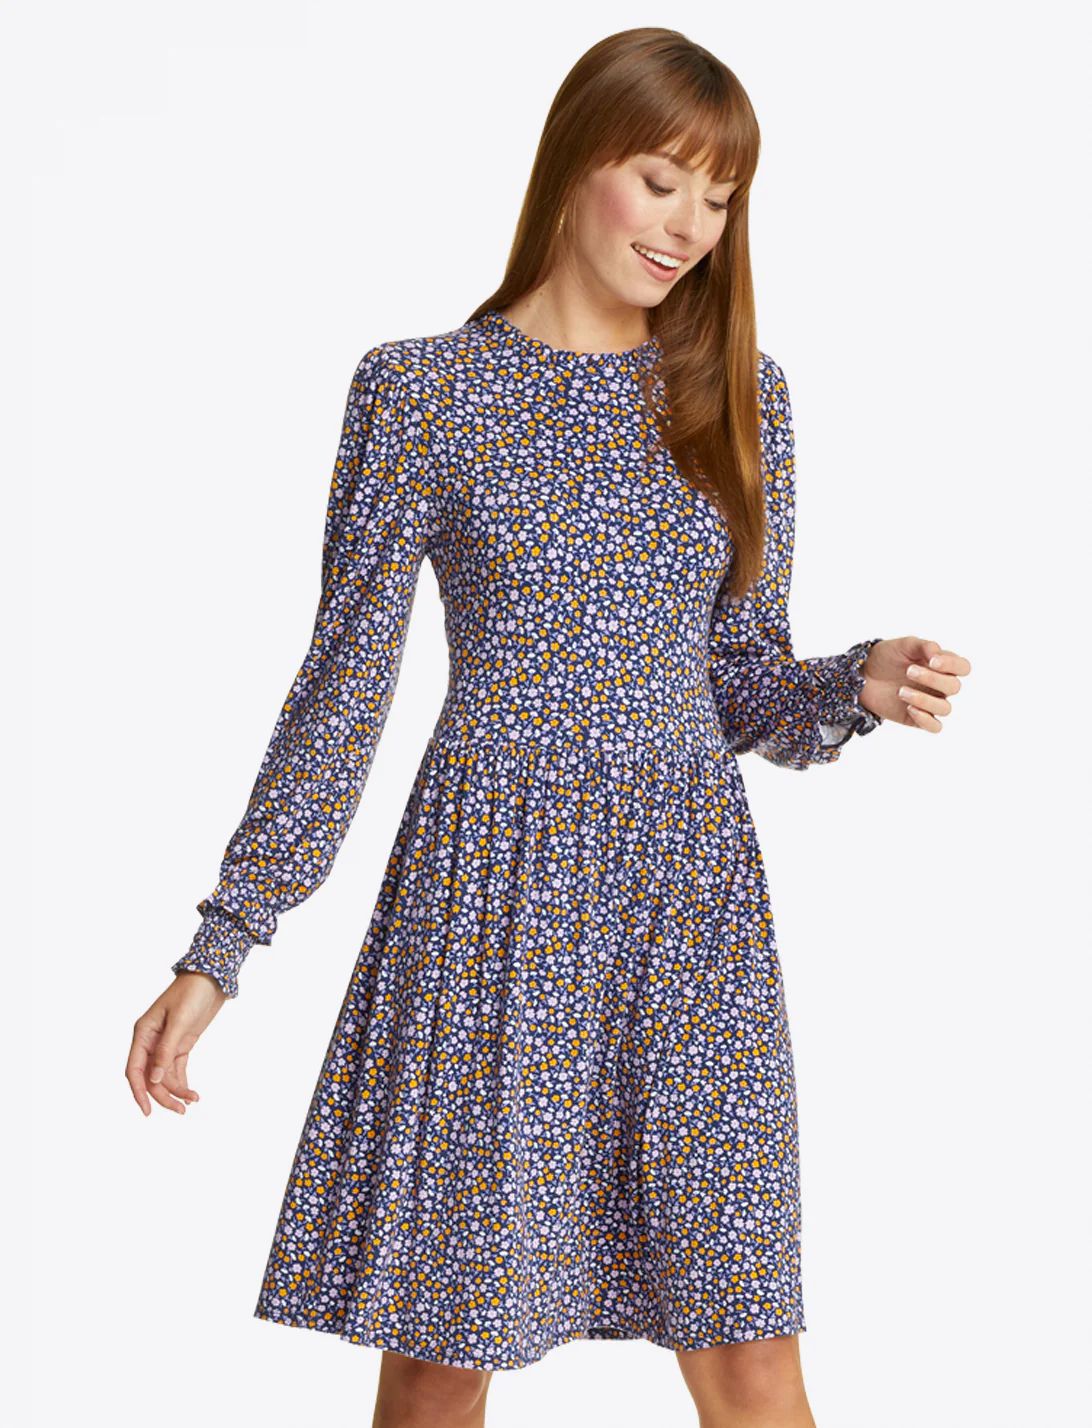 Kitty Knit Dress in Ditsy Floral | Draper James (US)